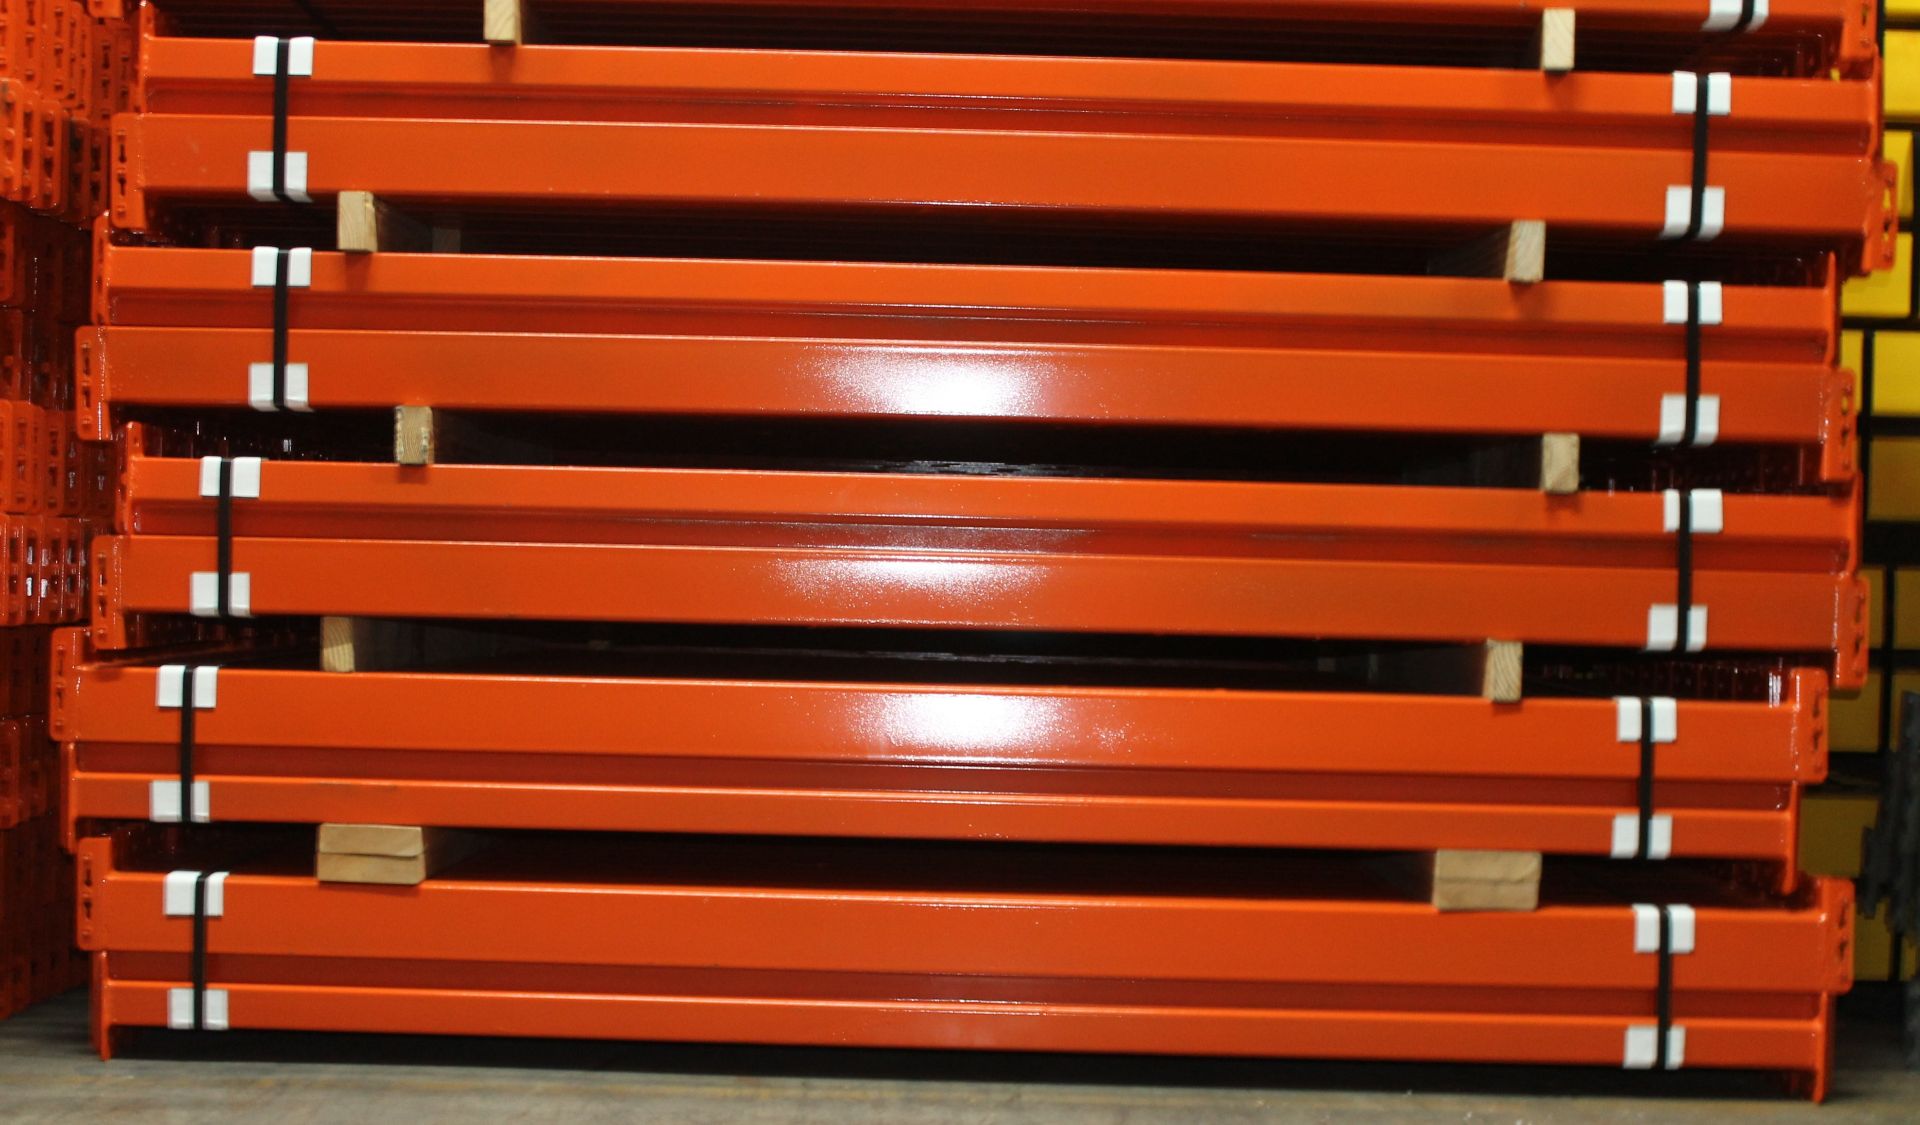 300 PCS OF TEAR DROP STYLE PALLET RACK BEAM SIZE 96"" X 3.5"". LIKE NEW. - Image 3 of 3